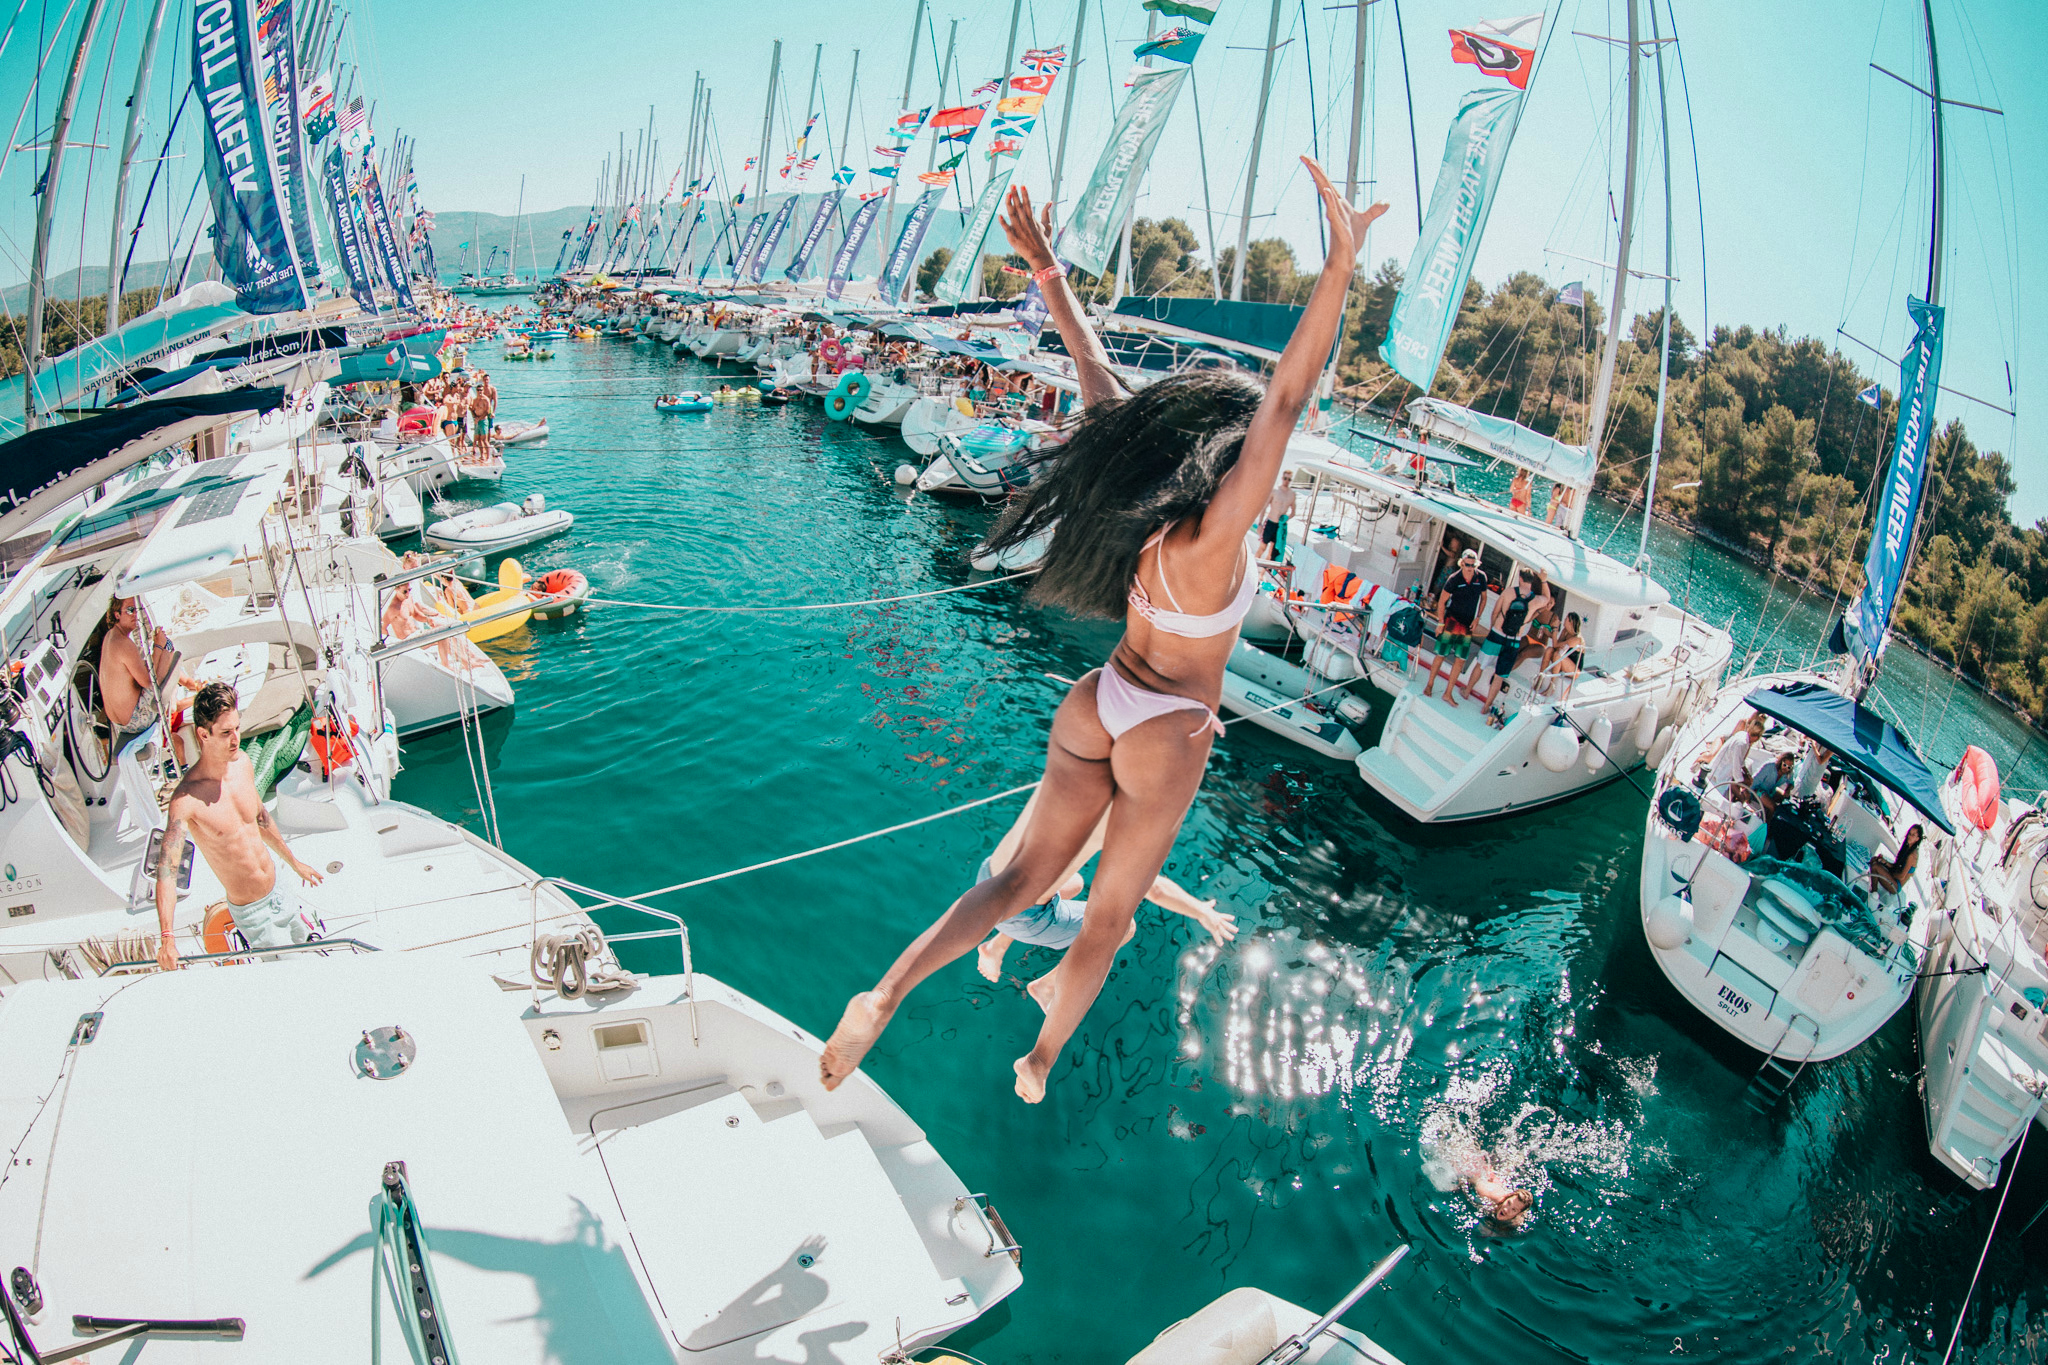 Croatia Yacht Week Trip For 7 Days in 7 Places